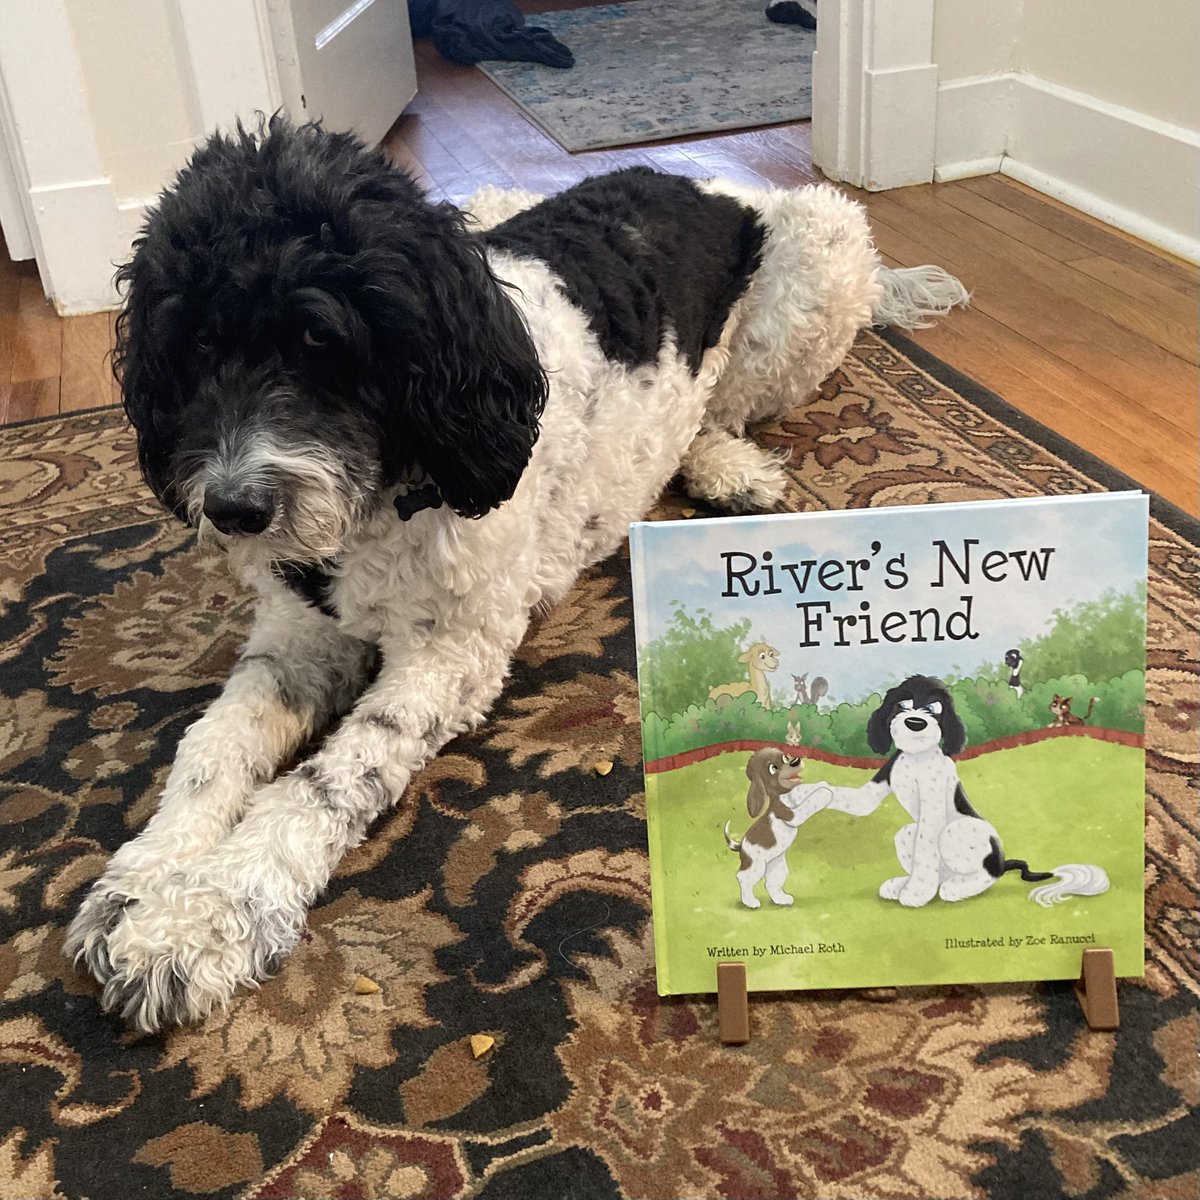 #picturebook #dogbook #dogs #goldendoodle #kidslit #childrensbook #writingcommunity #readersoftwitter